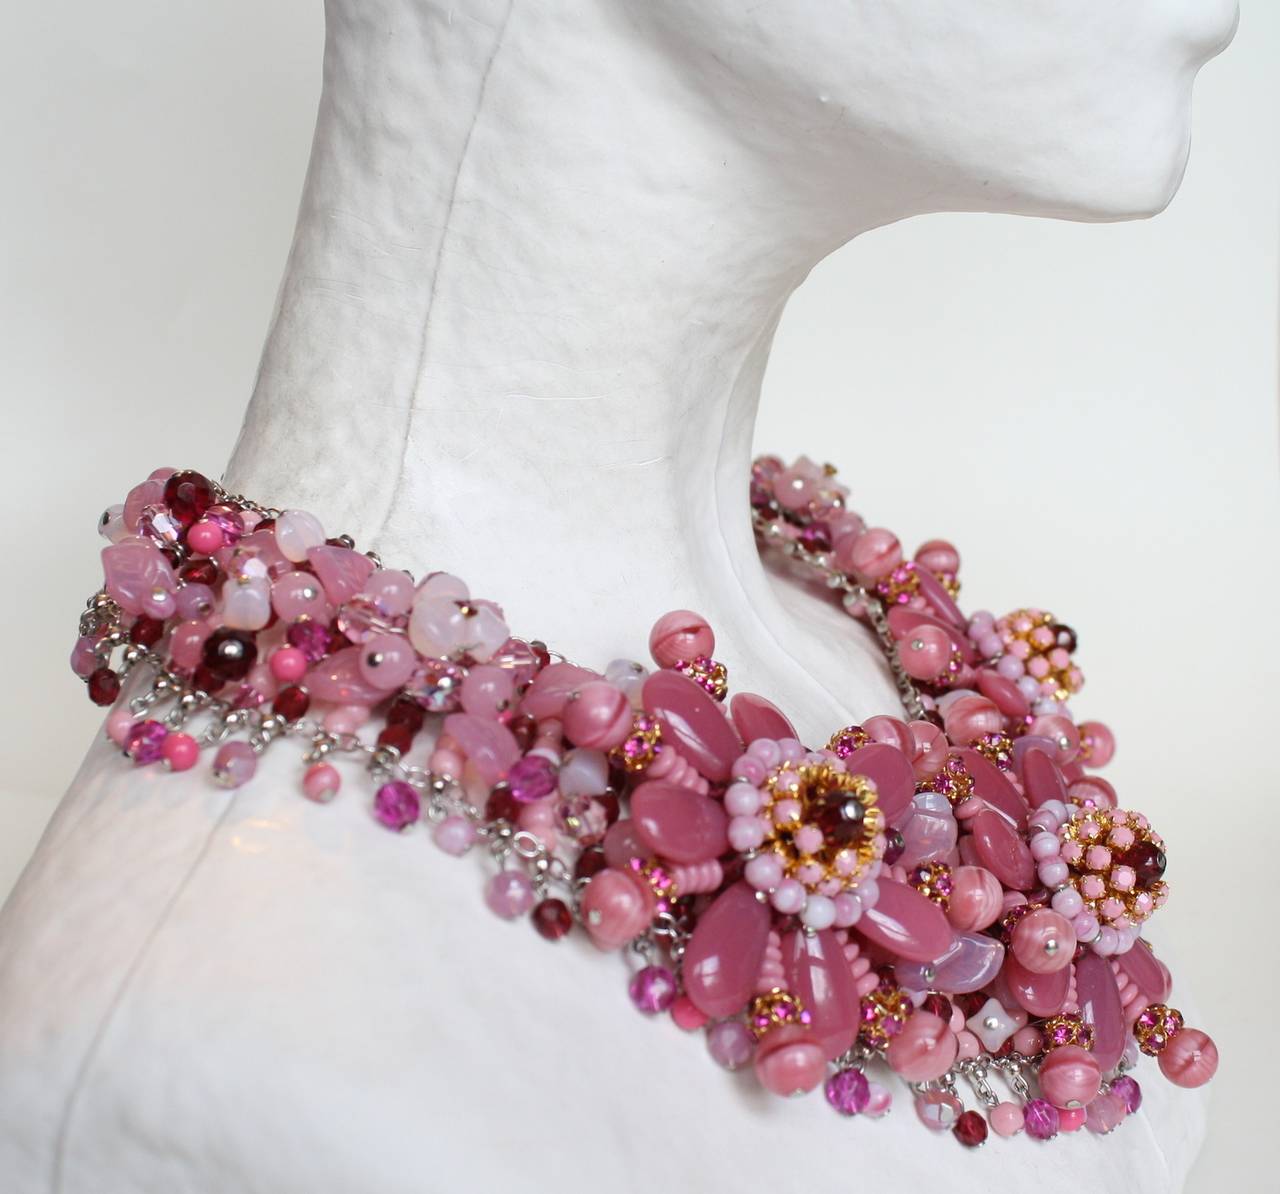 In her signature style, Francoise Montague has created a timeless statement necklace comprised of varying shades of pink glass beads and Swarovski crystals. Hand made in Paris, France. 

14